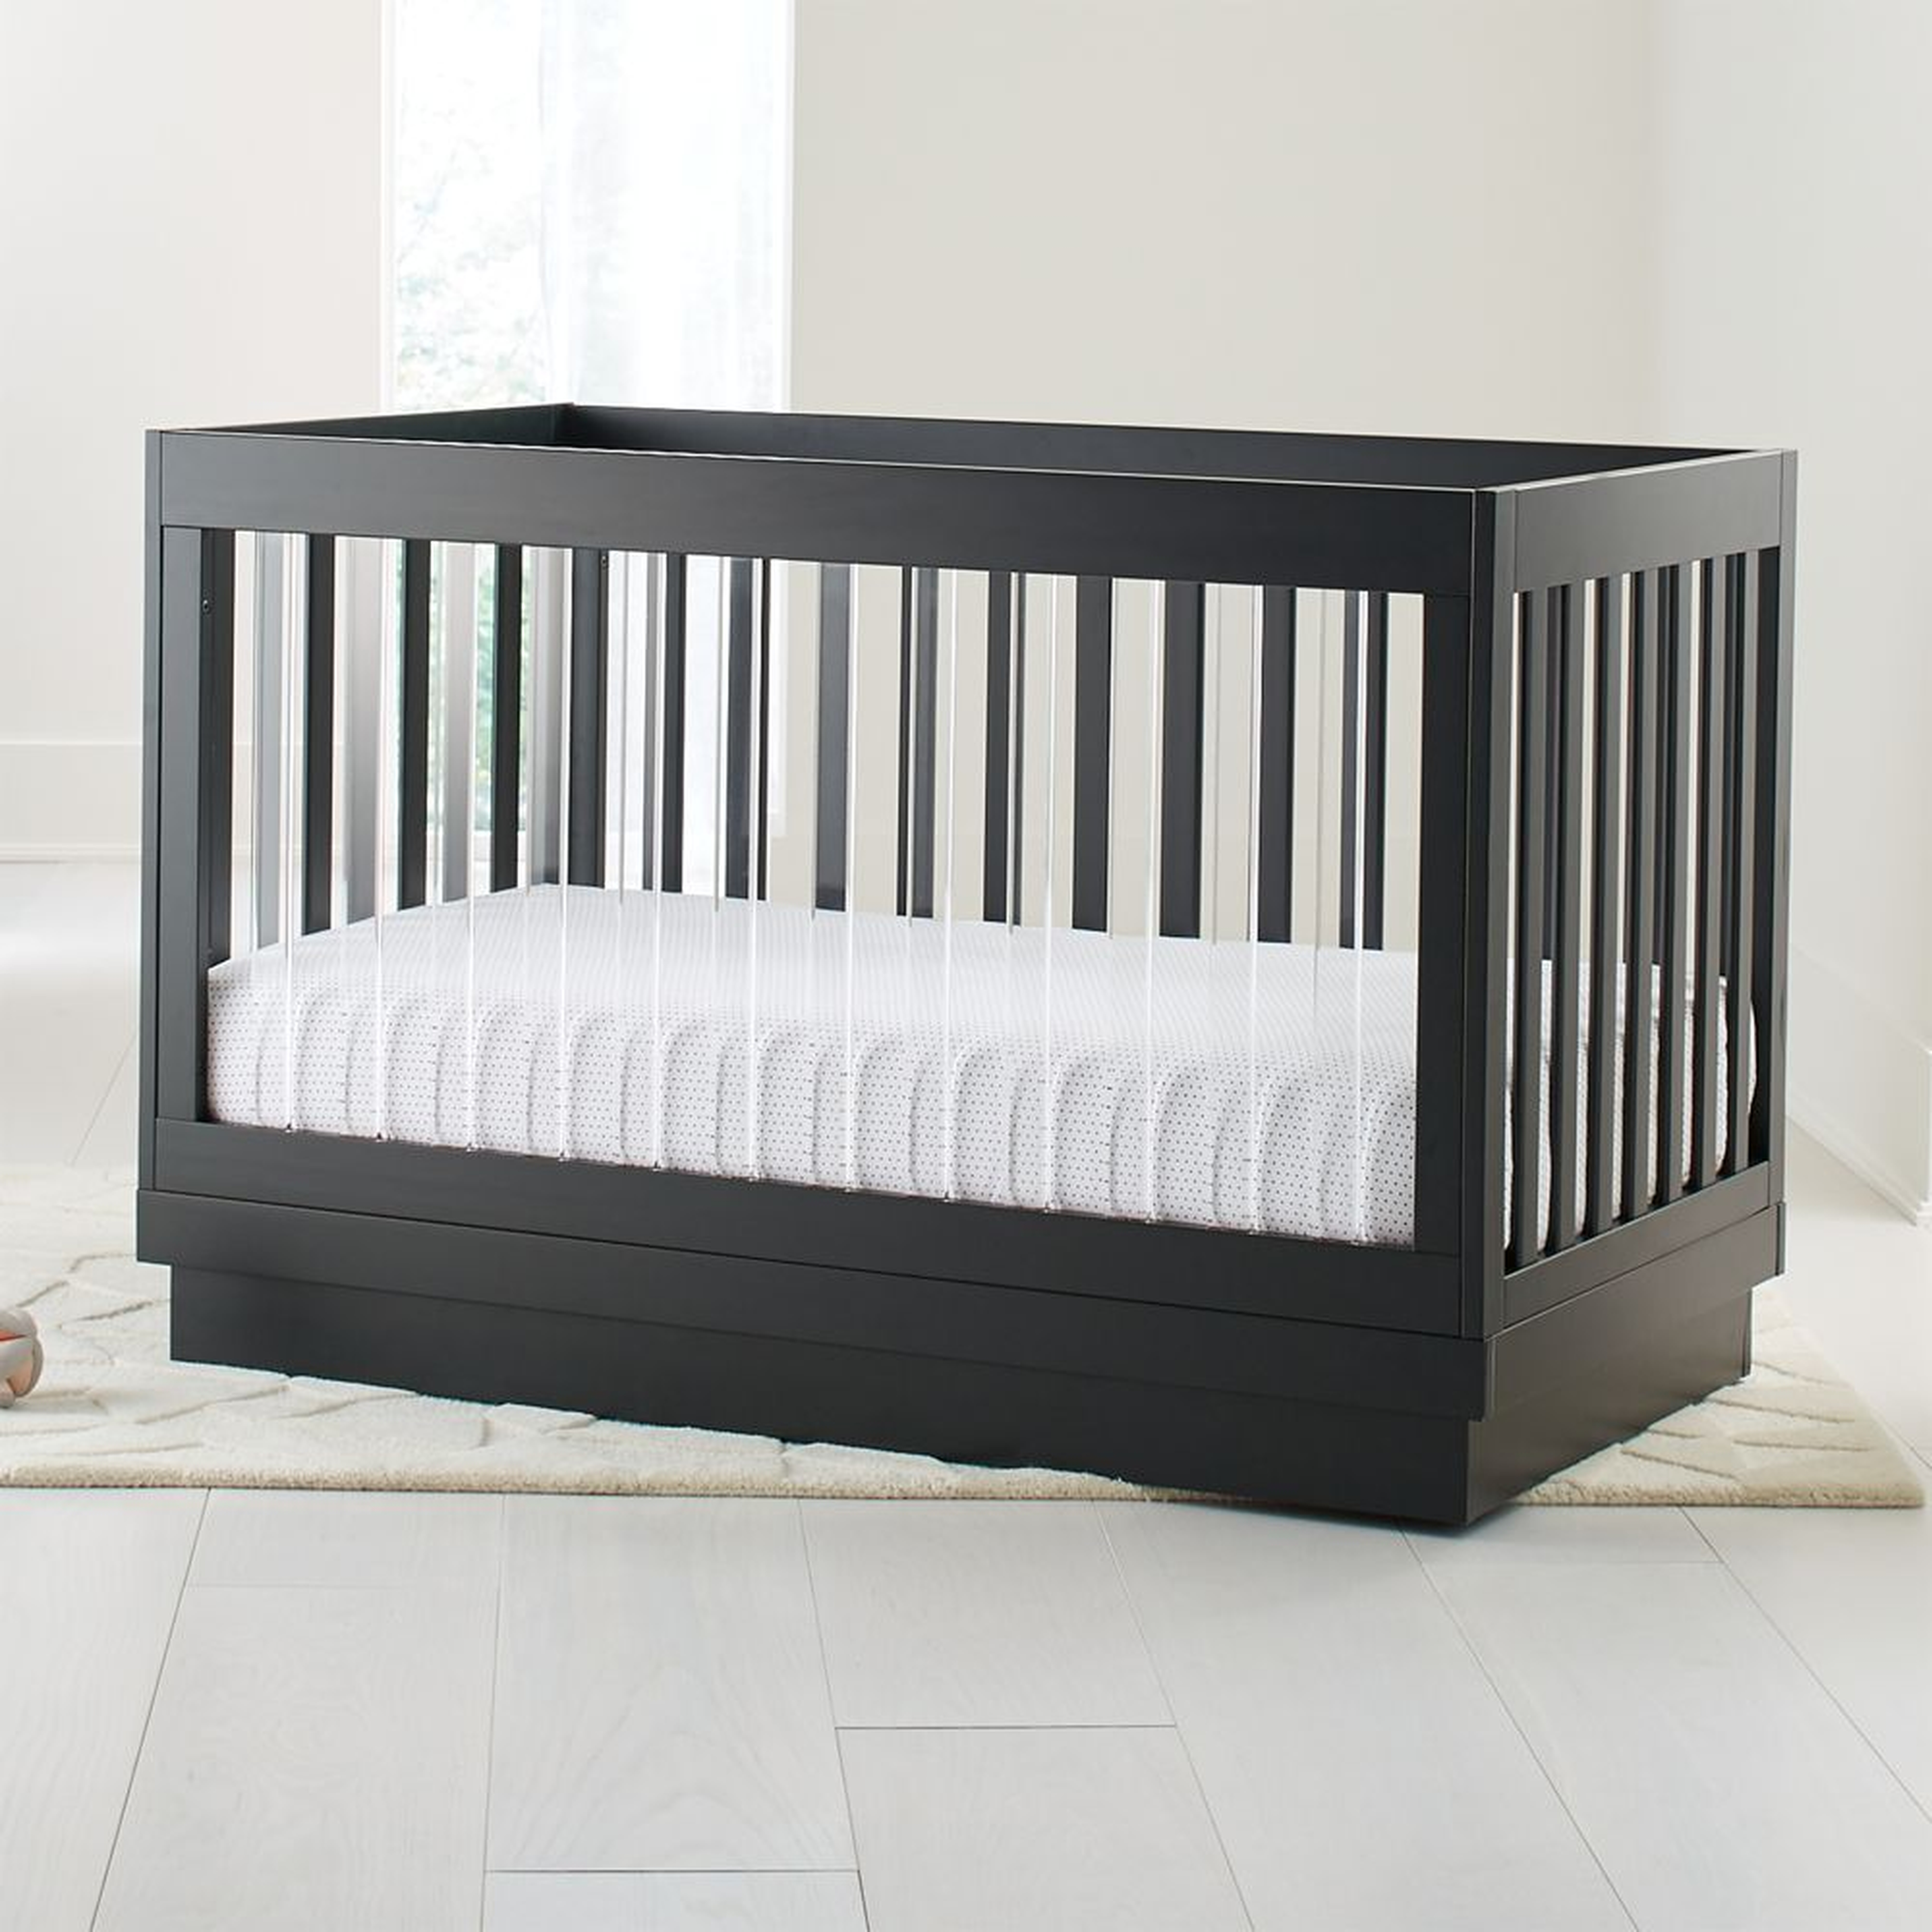 Babyletto Harlow Acrylic and Black 3-in-1 Convertible Crib - Crate and Barrel